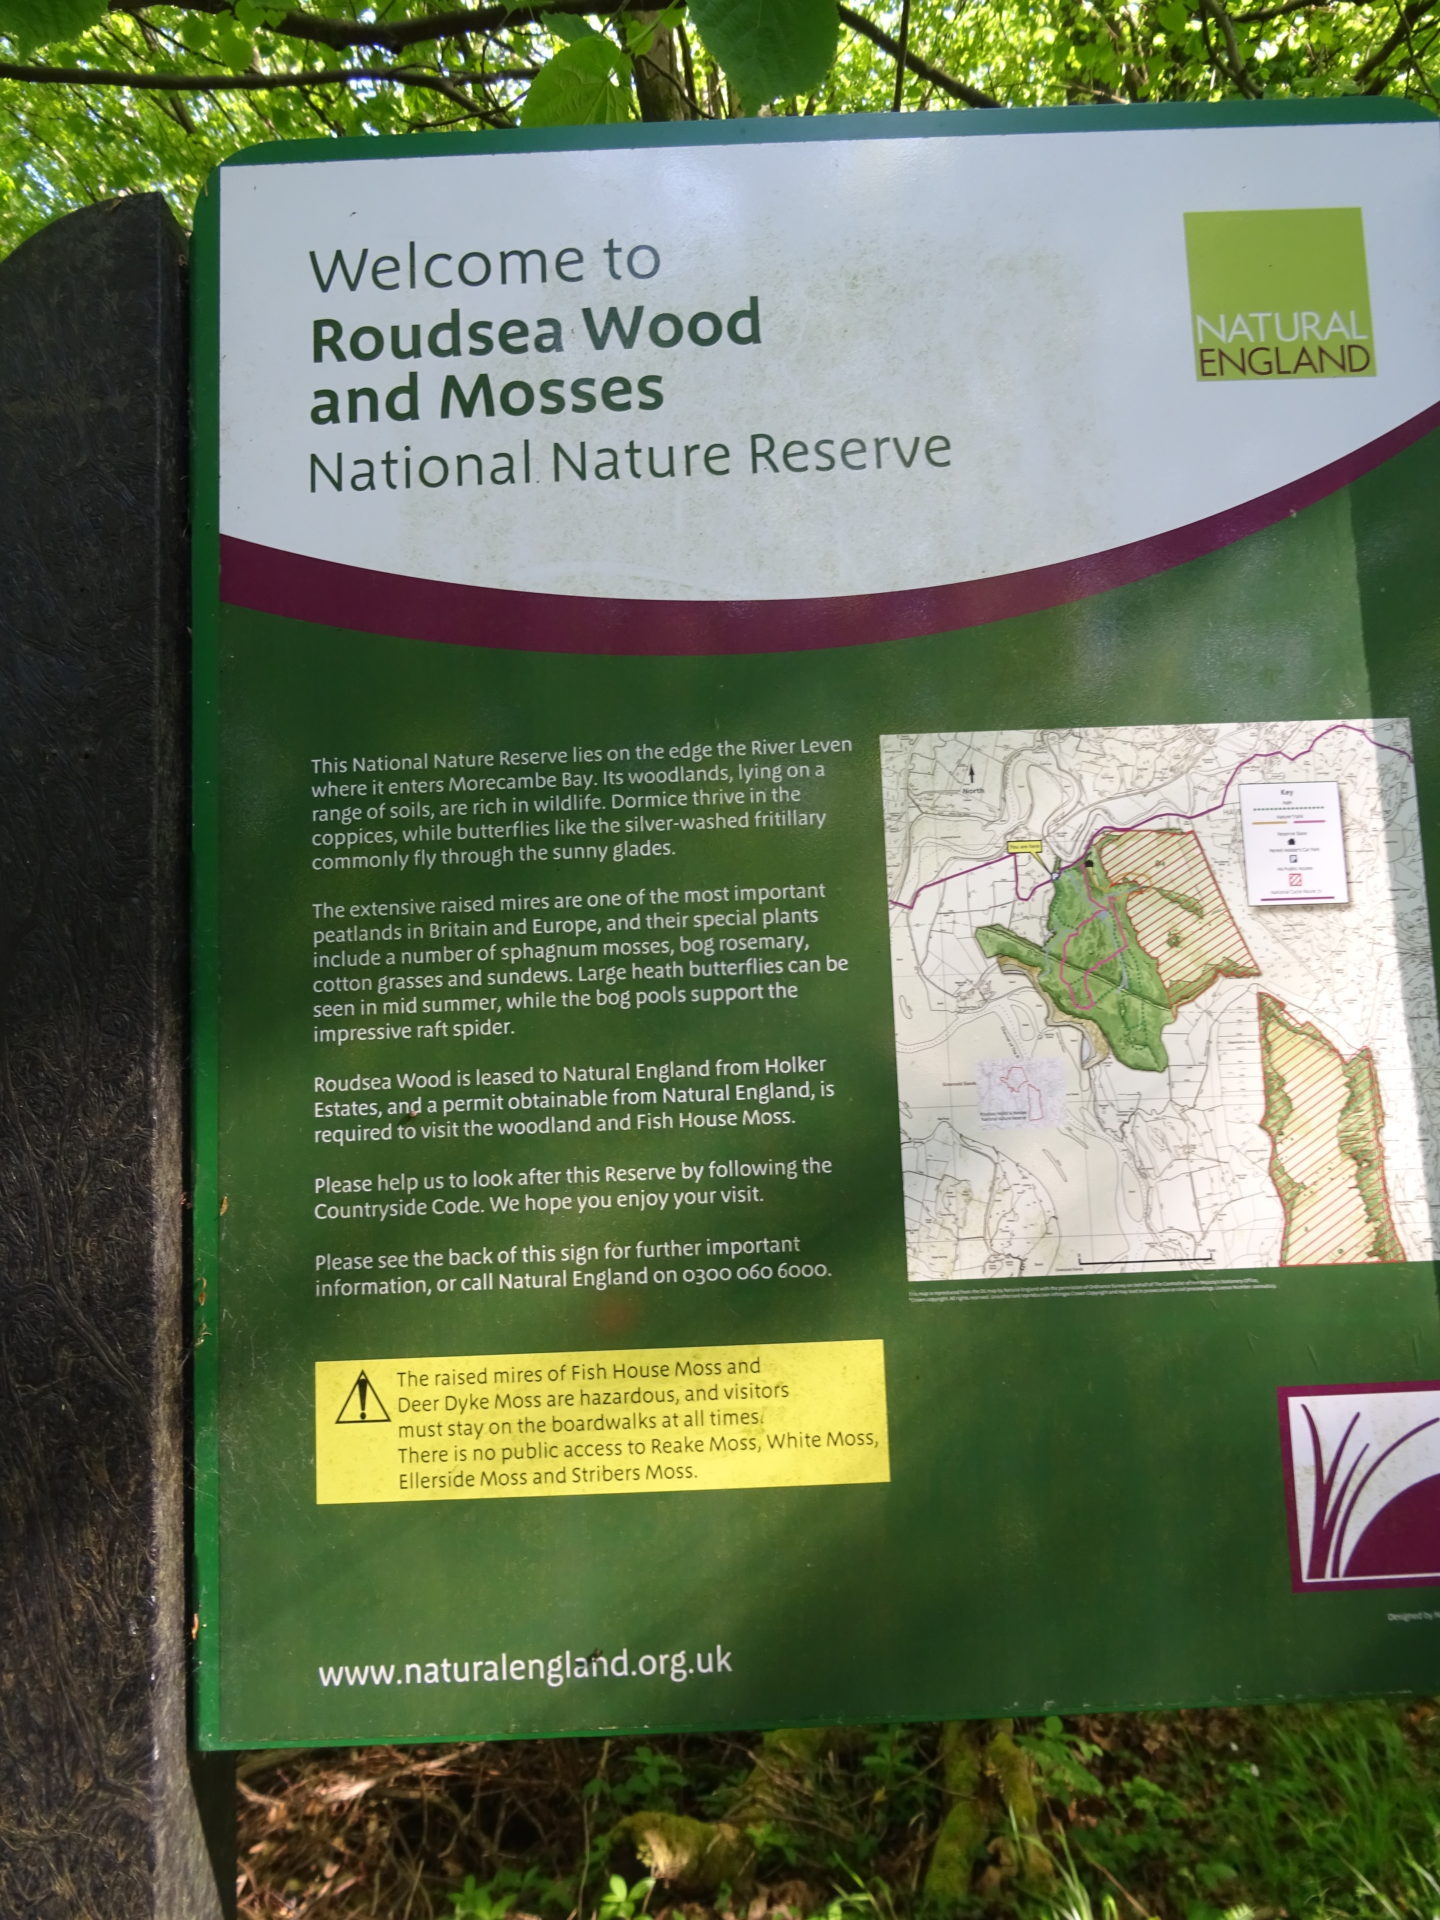 Roudsea Woods and Mosses